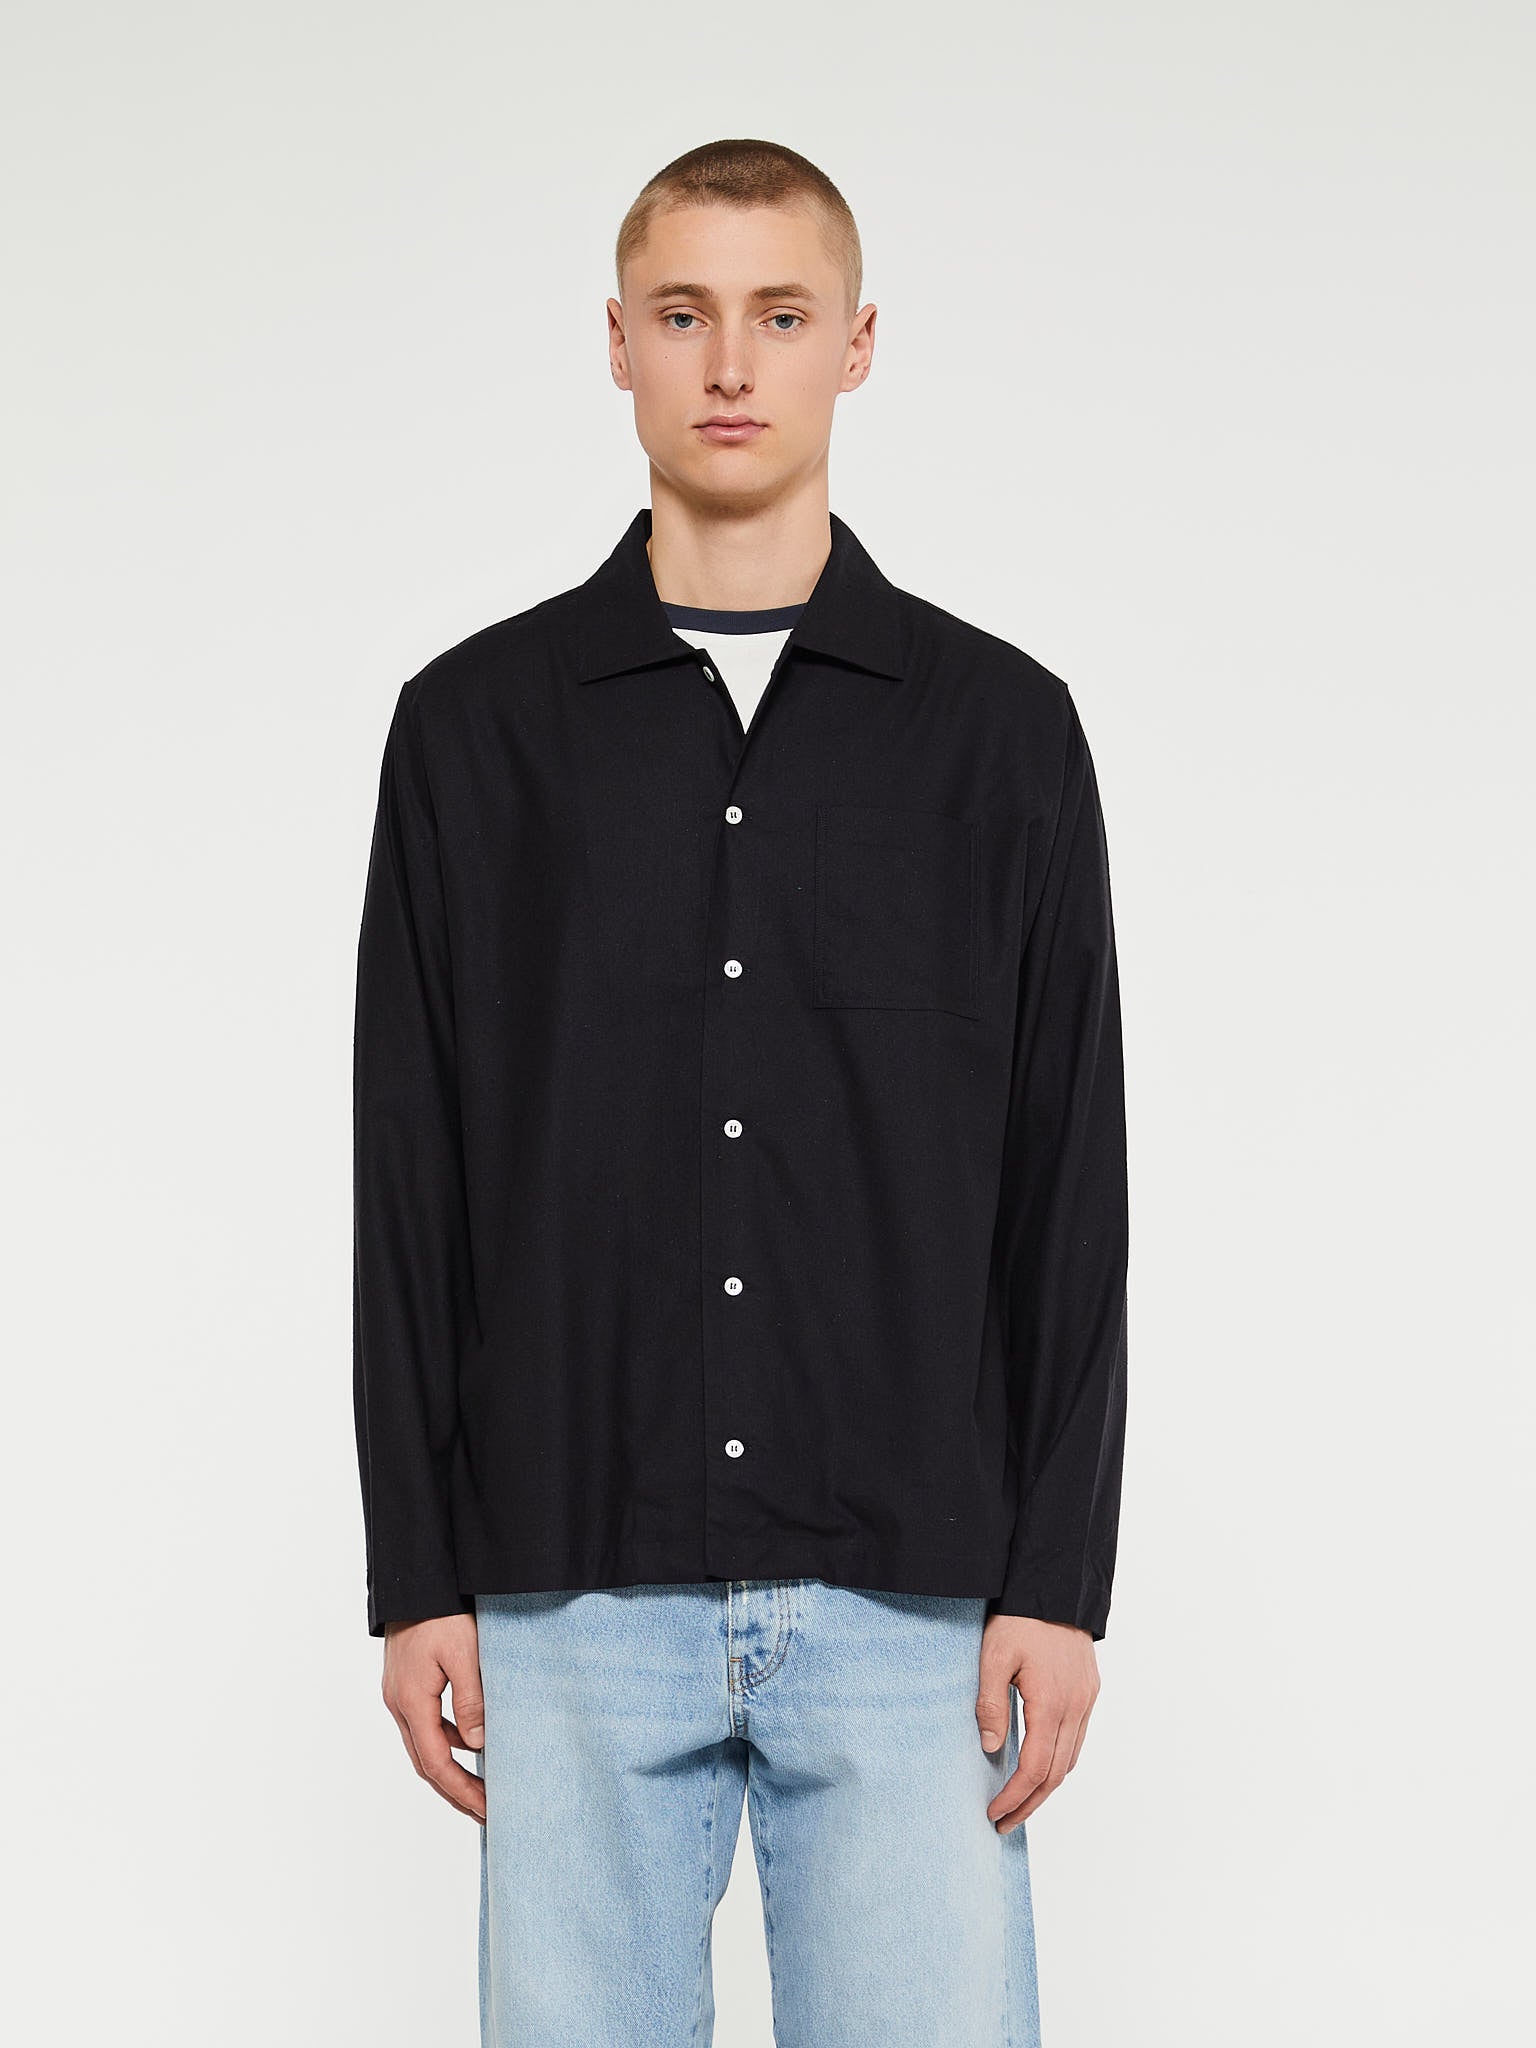 Another Aspect - Another Shirt 2.1 in Black